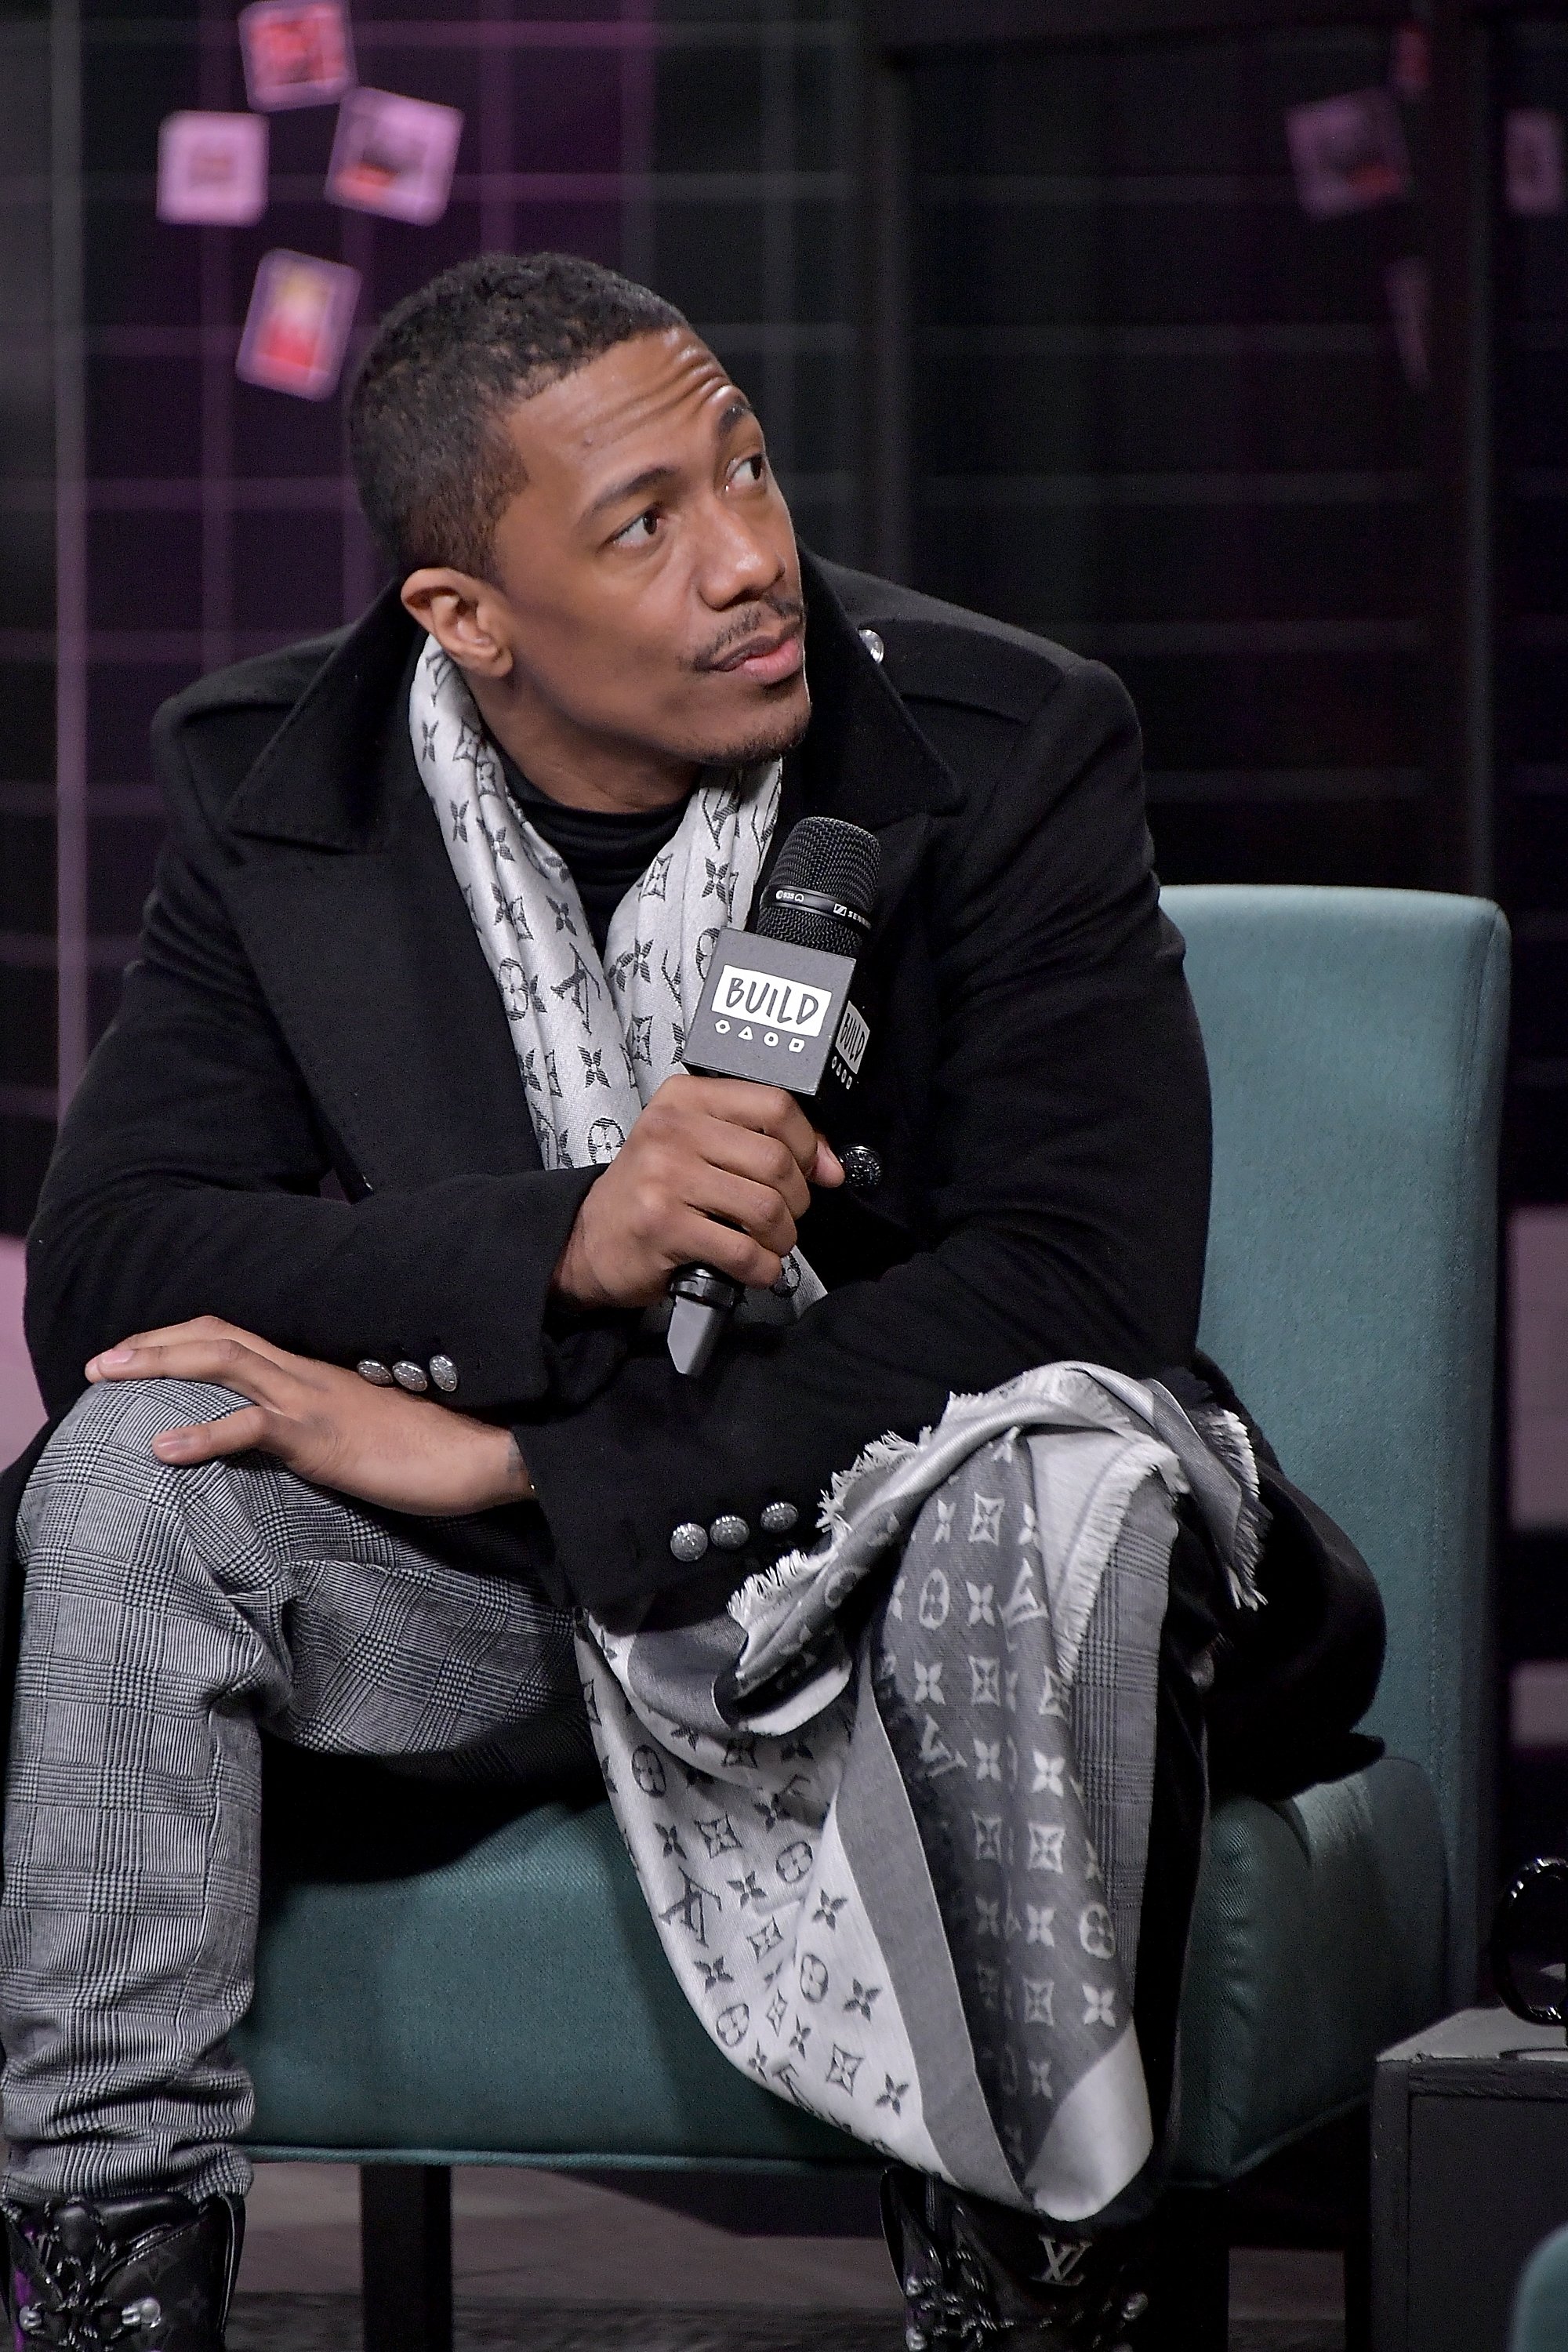 Nick Cannon visits Build and discusses his reality show, "The Masked Singer" in December 2018 in New York City. | Photo: Getty Images